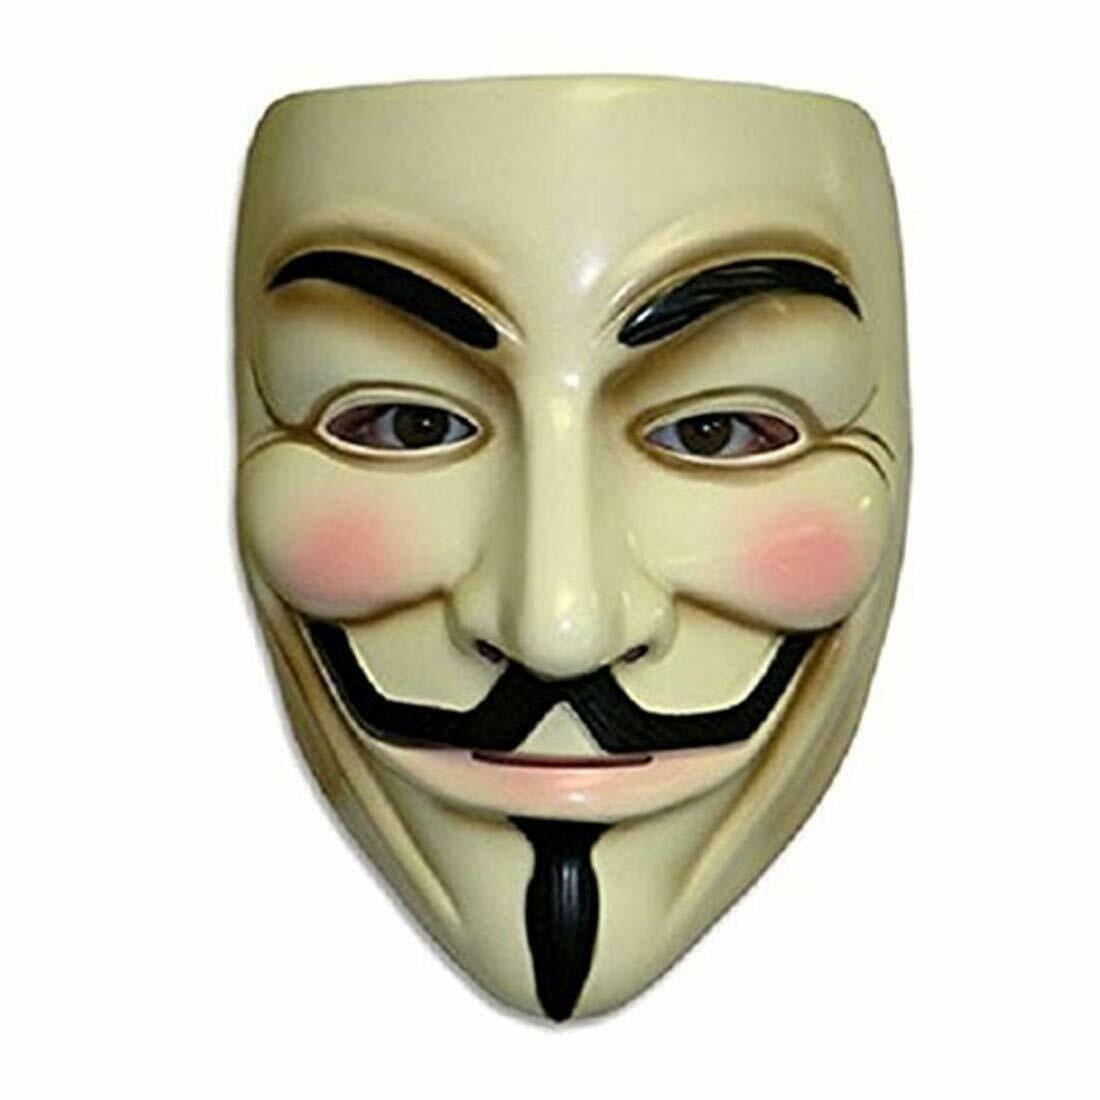 V for Vendetta Mask Collector Edition Guy Fawkes Fancy Dress Costume Accessory 